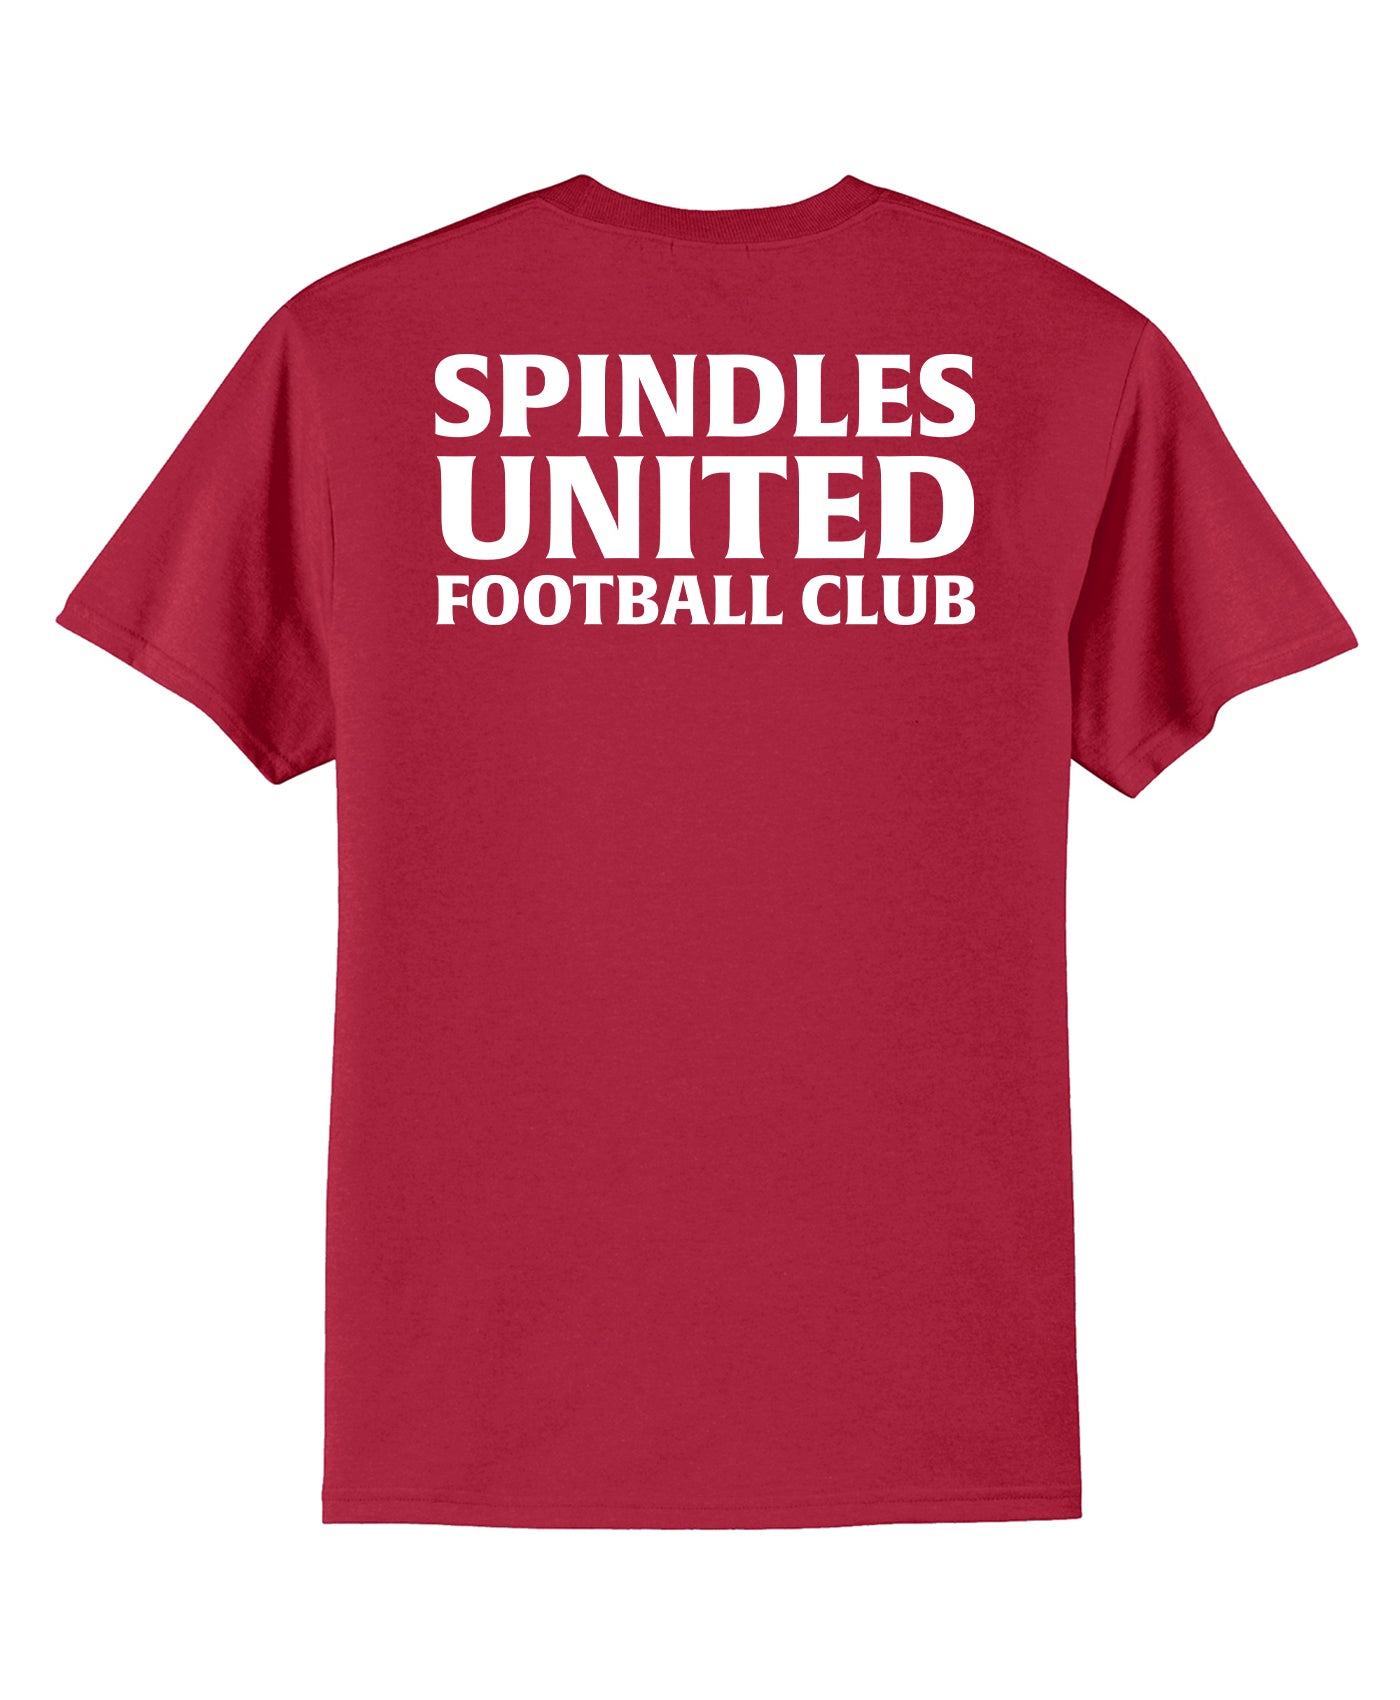 The Spindles Tee